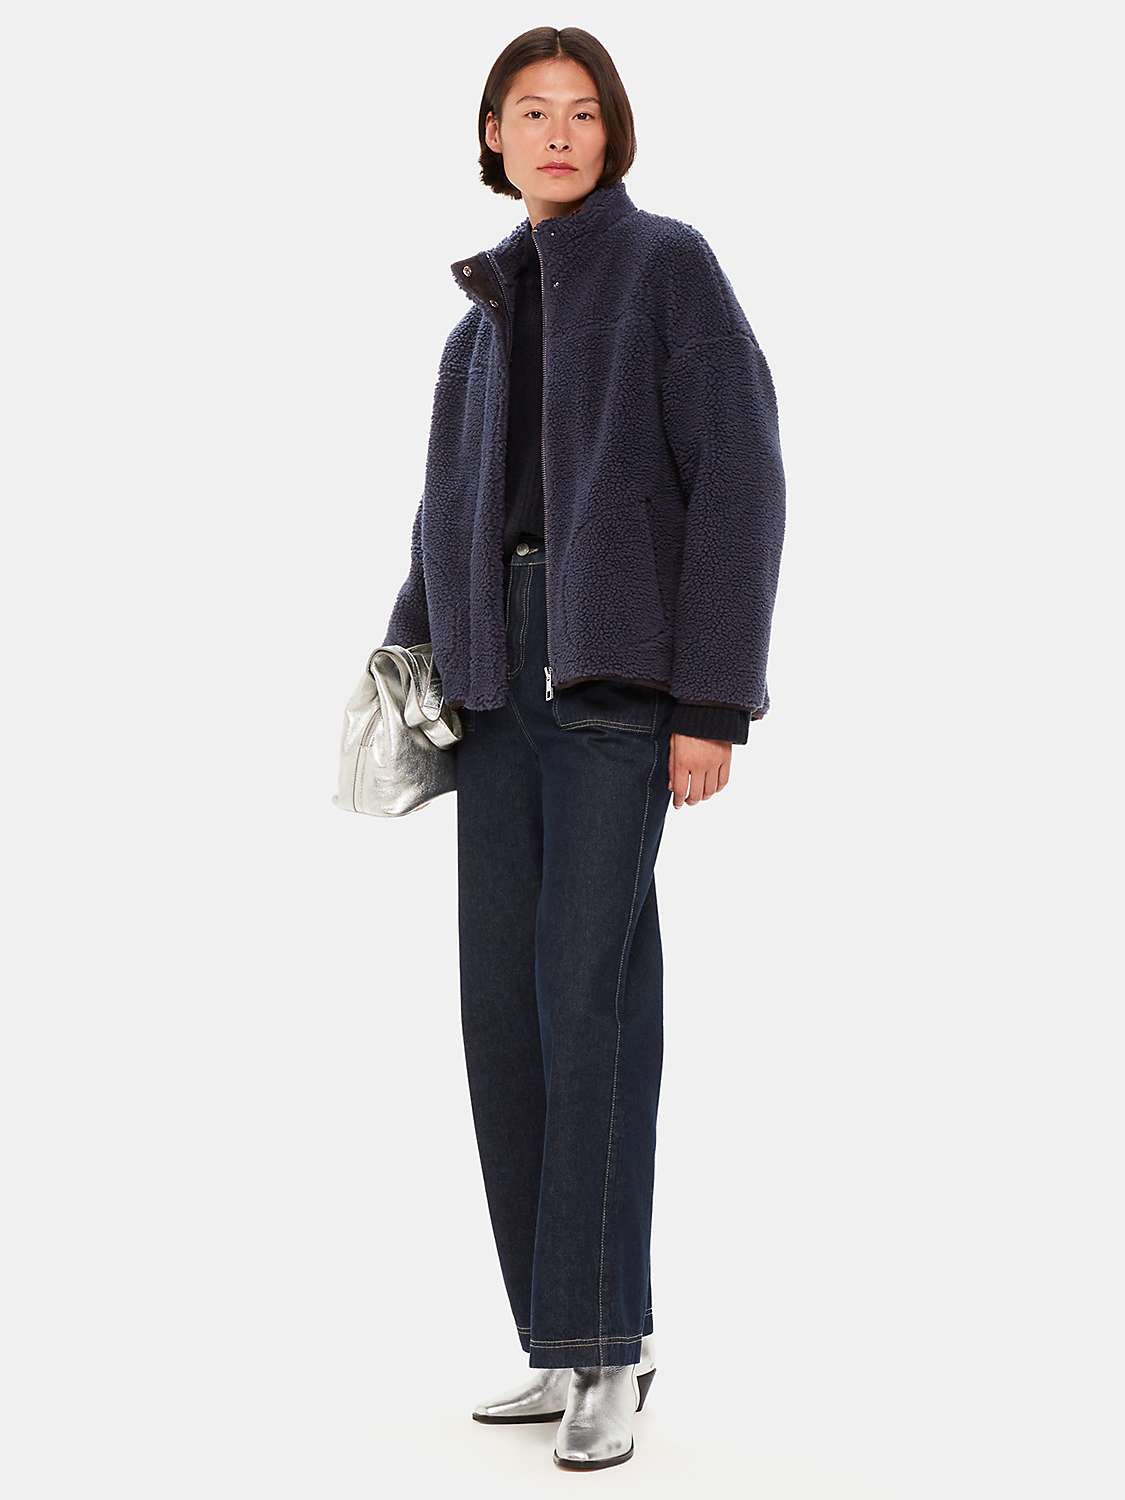 Buy Whistles Faux Teddy Bomber Jacket, Navy Online at johnlewis.com